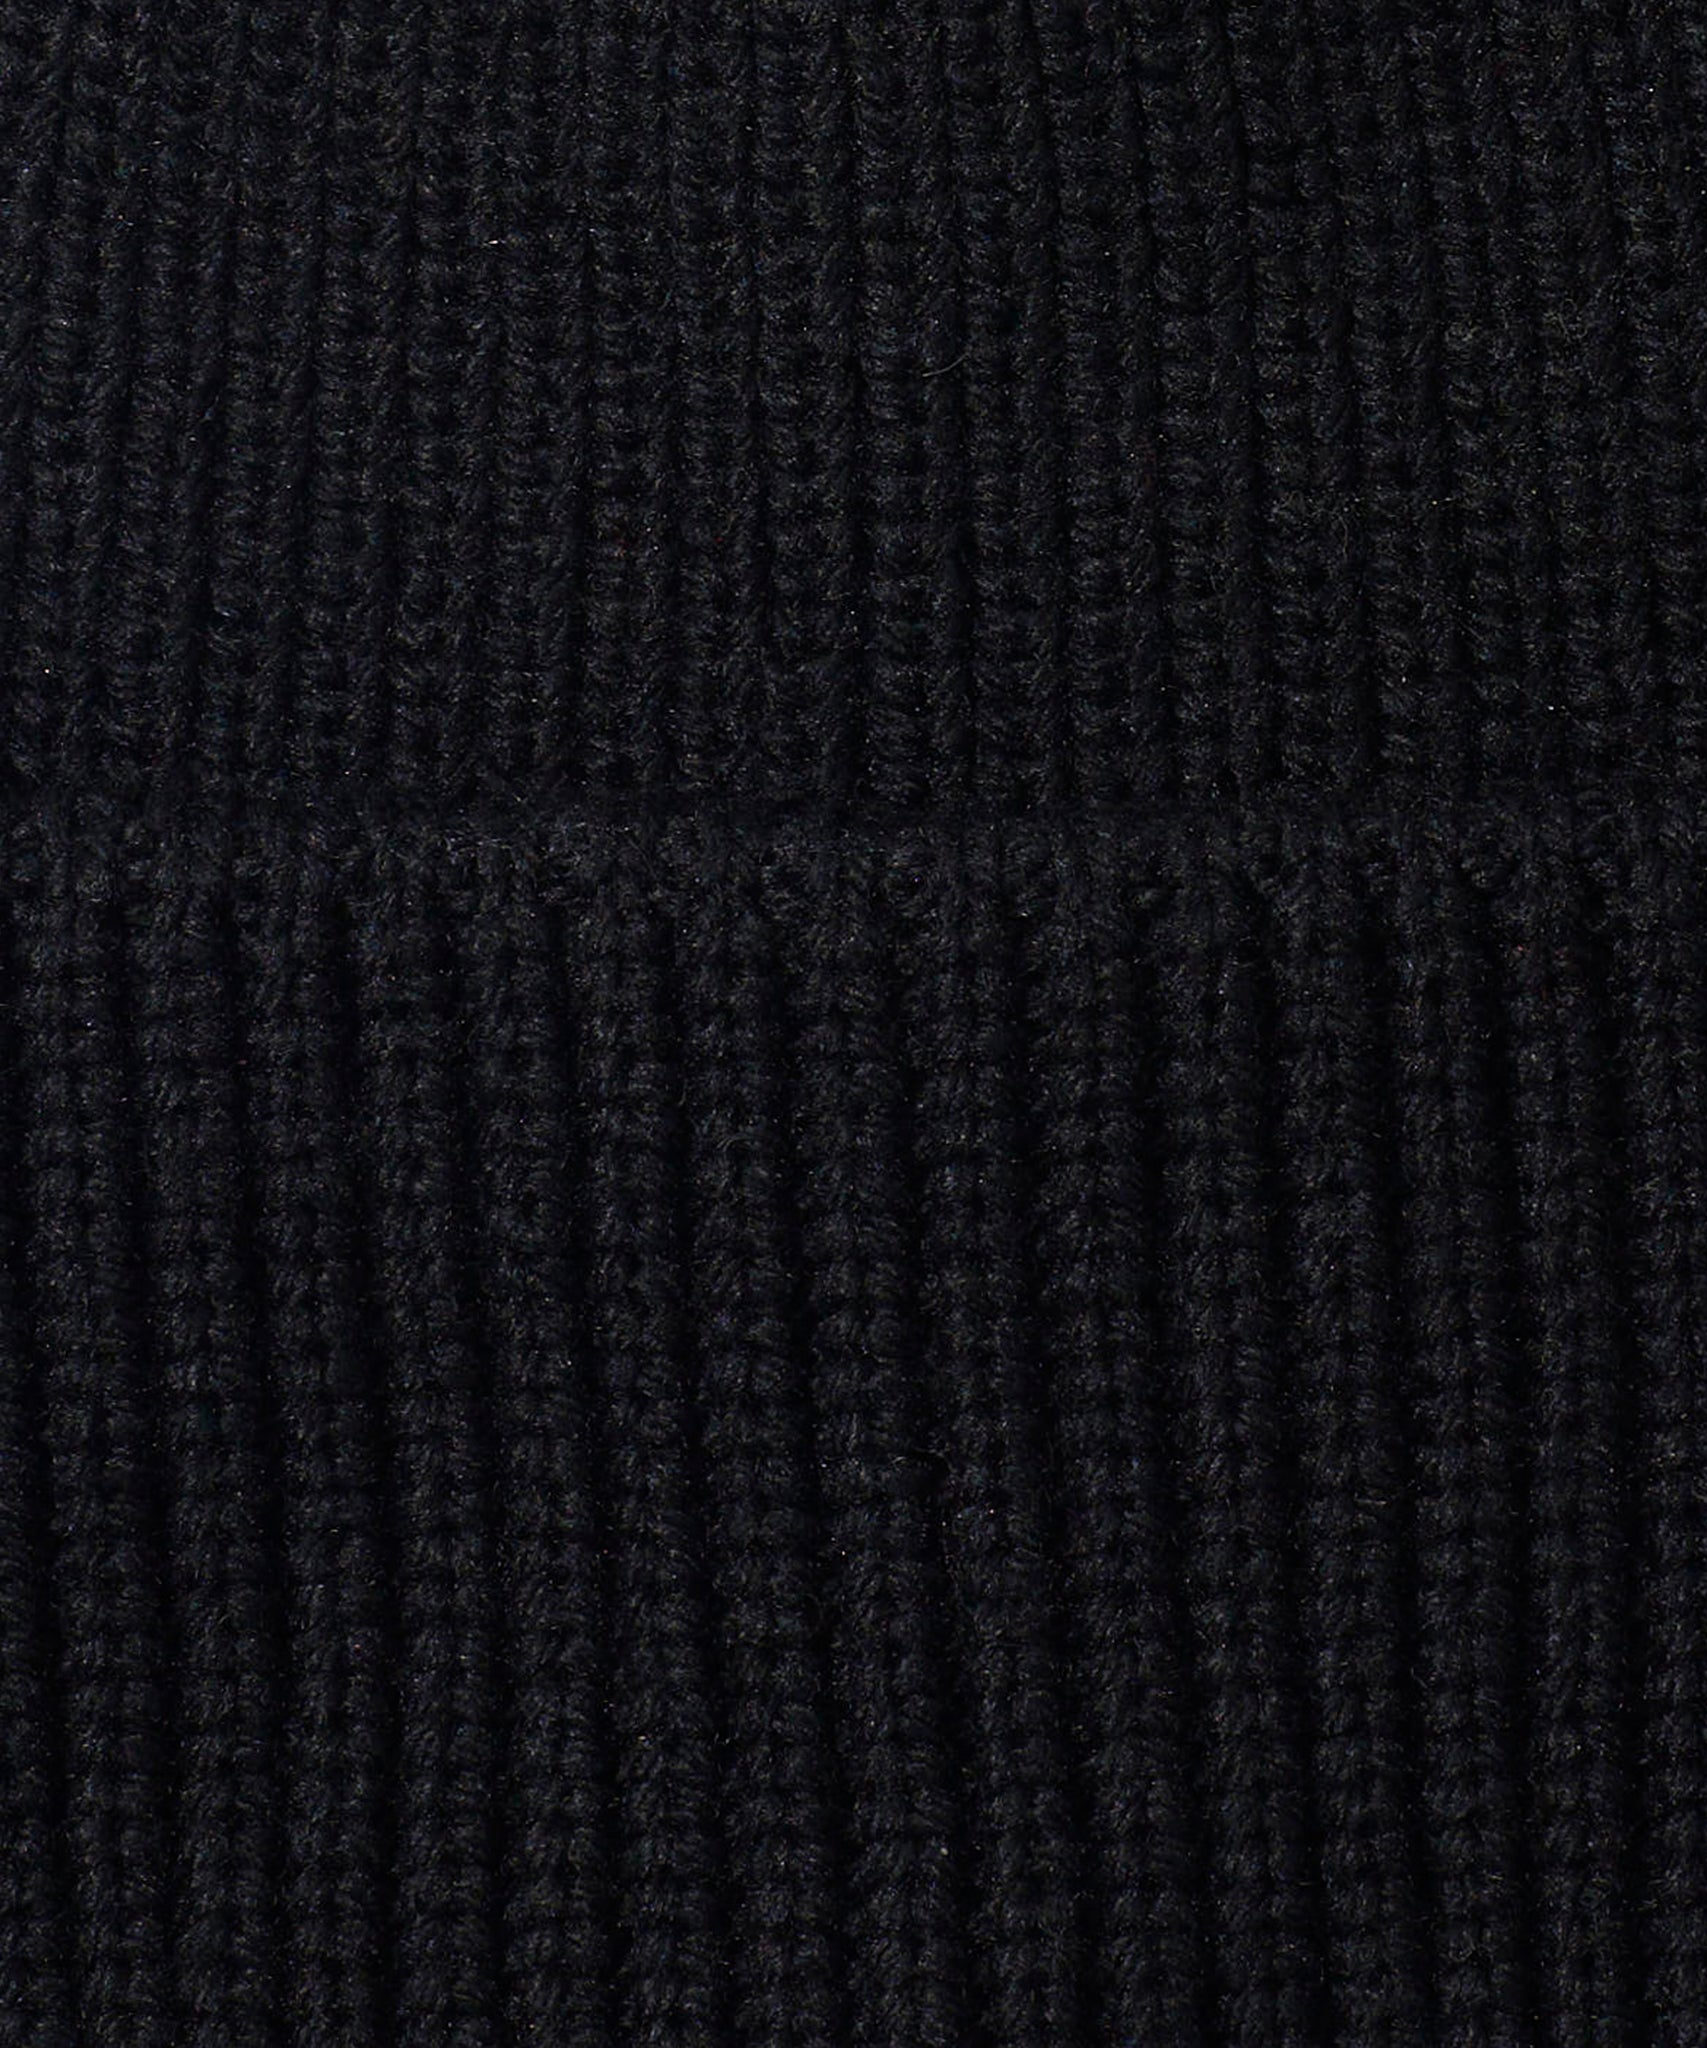 Perfect Ribbed Beanie in color Black